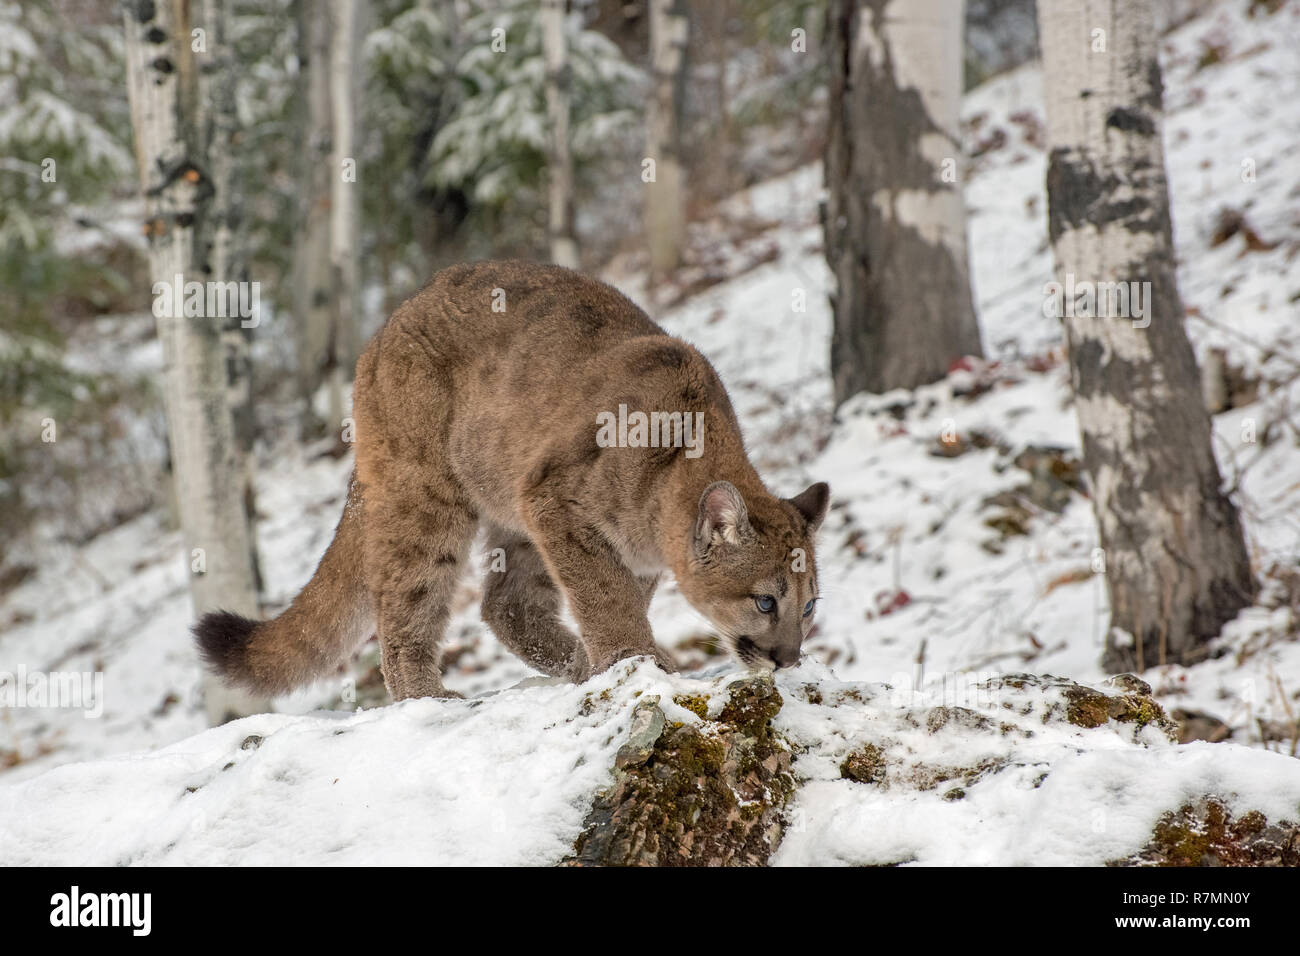 Mountain Lion Cub Crouched down in the Snow, Looking Up Stock Photo